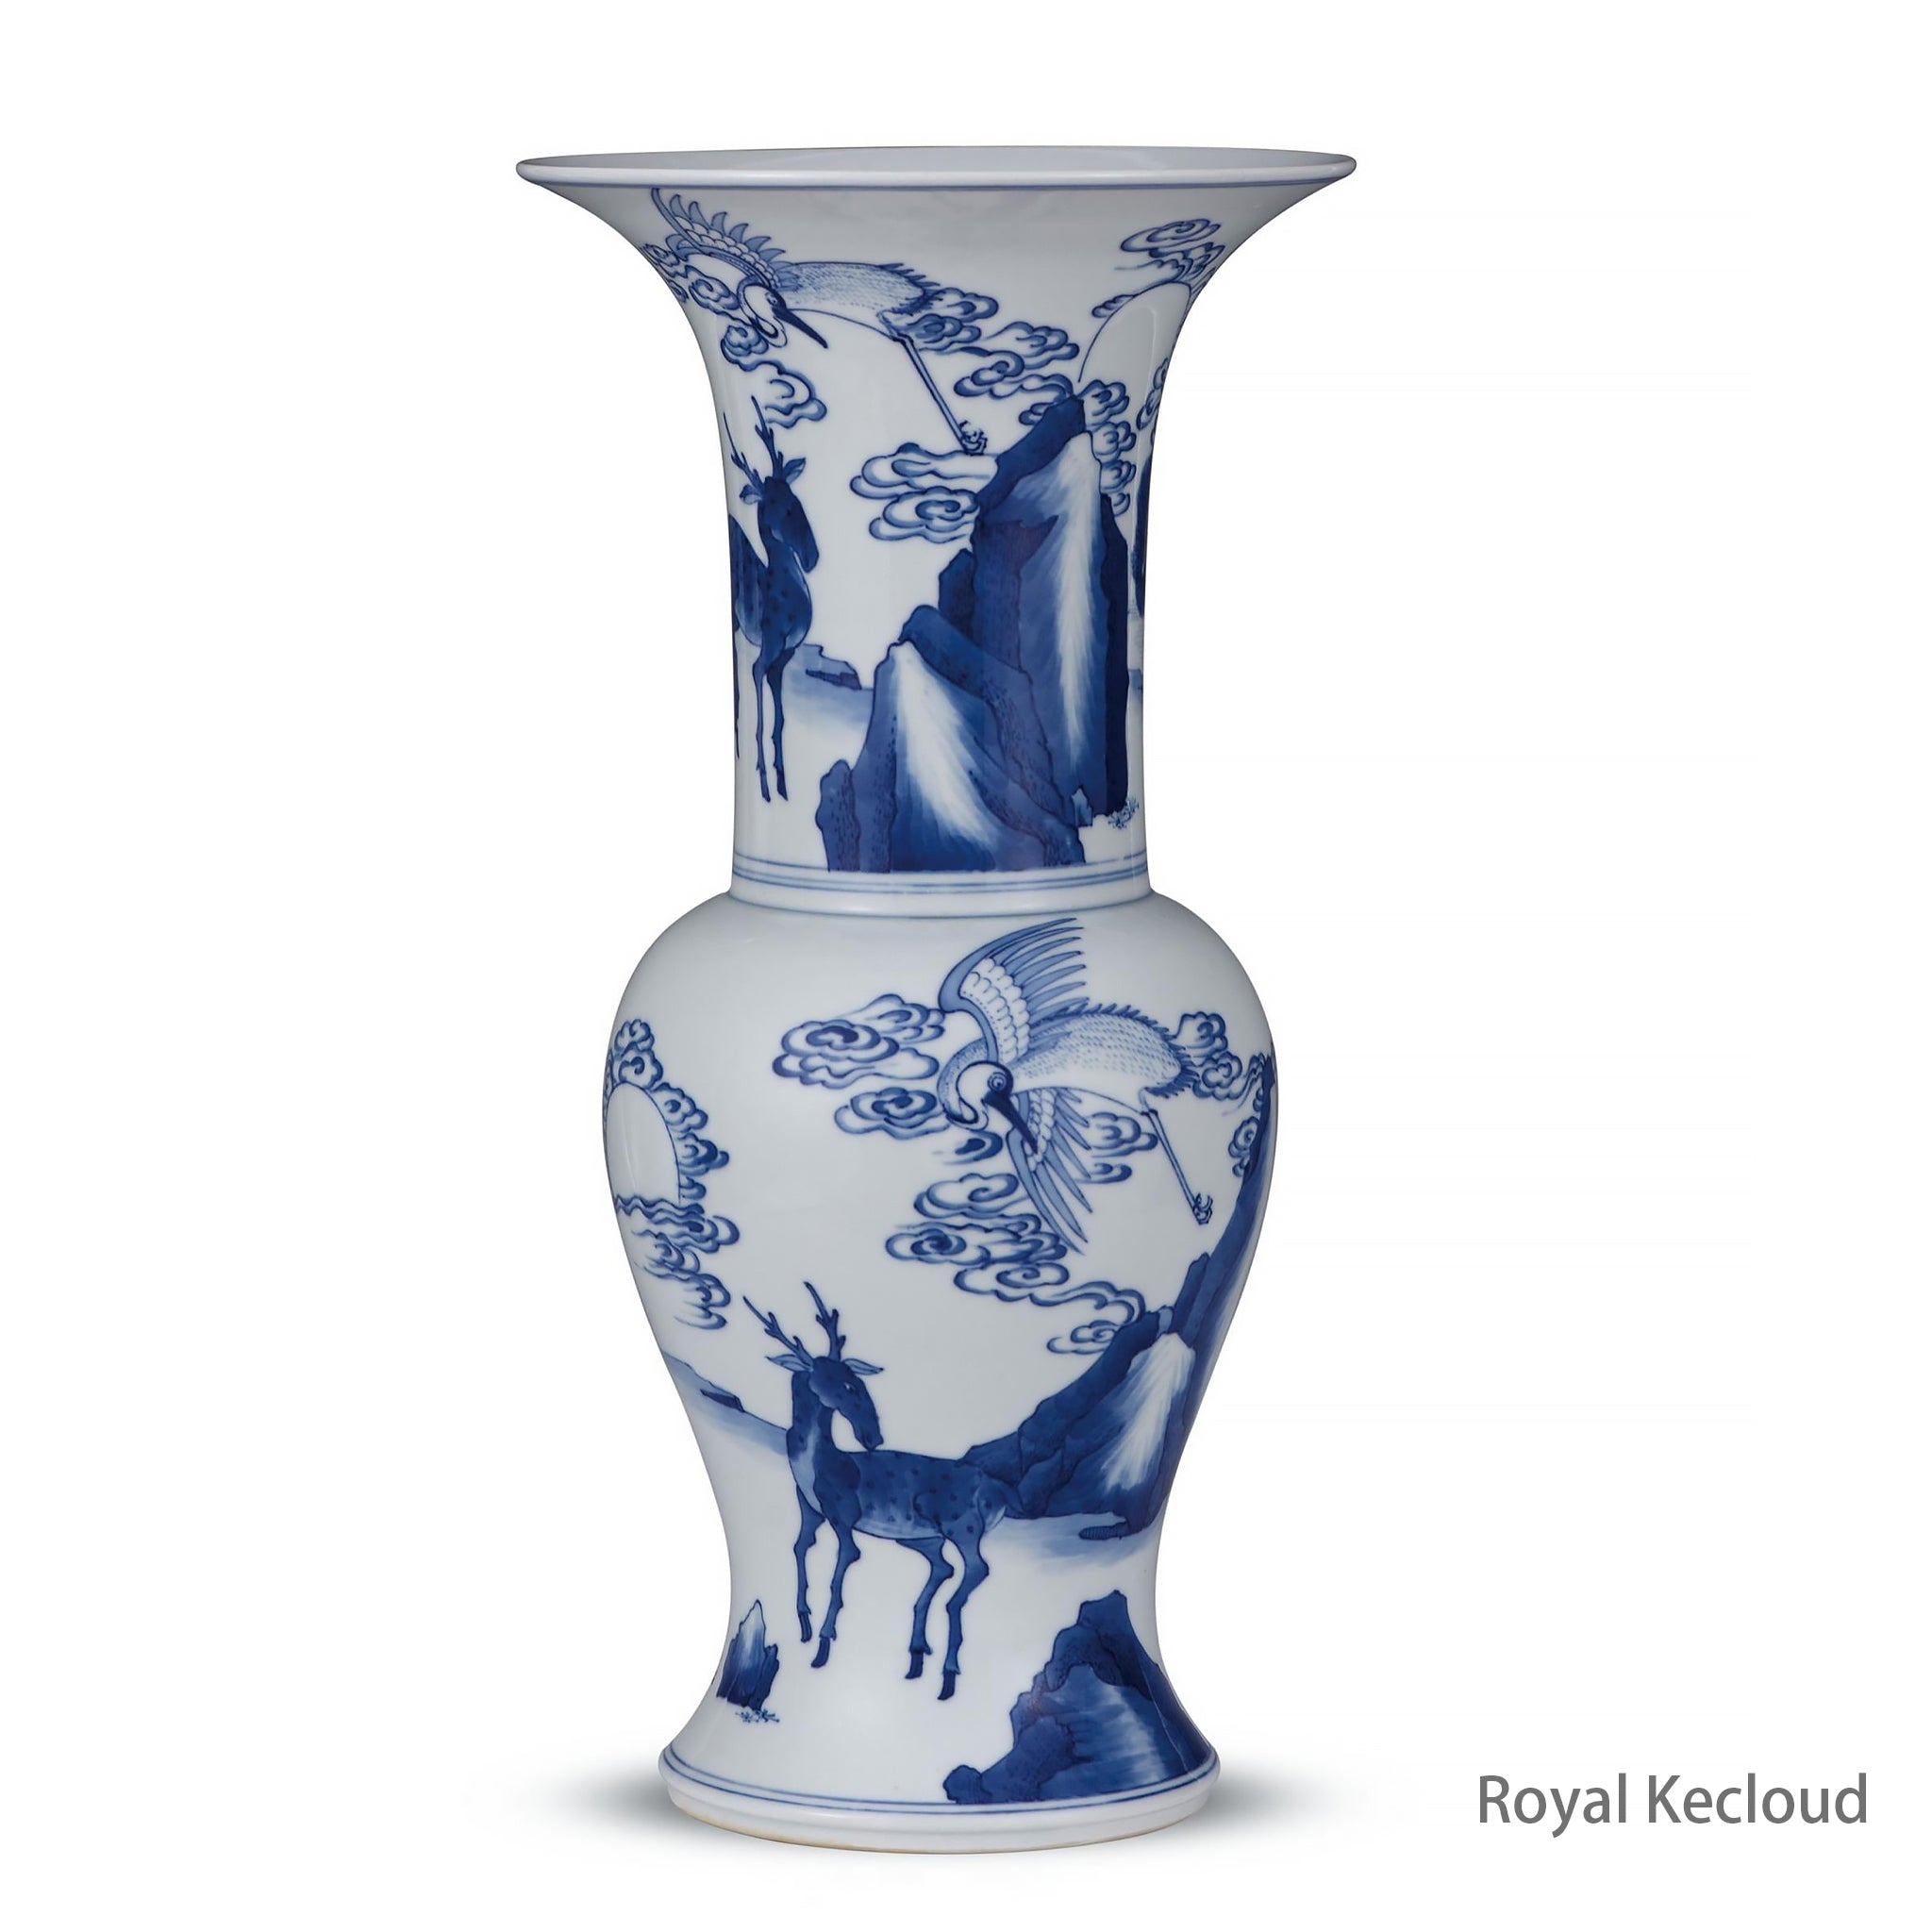 First-class Reproductions of the Chinese Royal Porcelain 